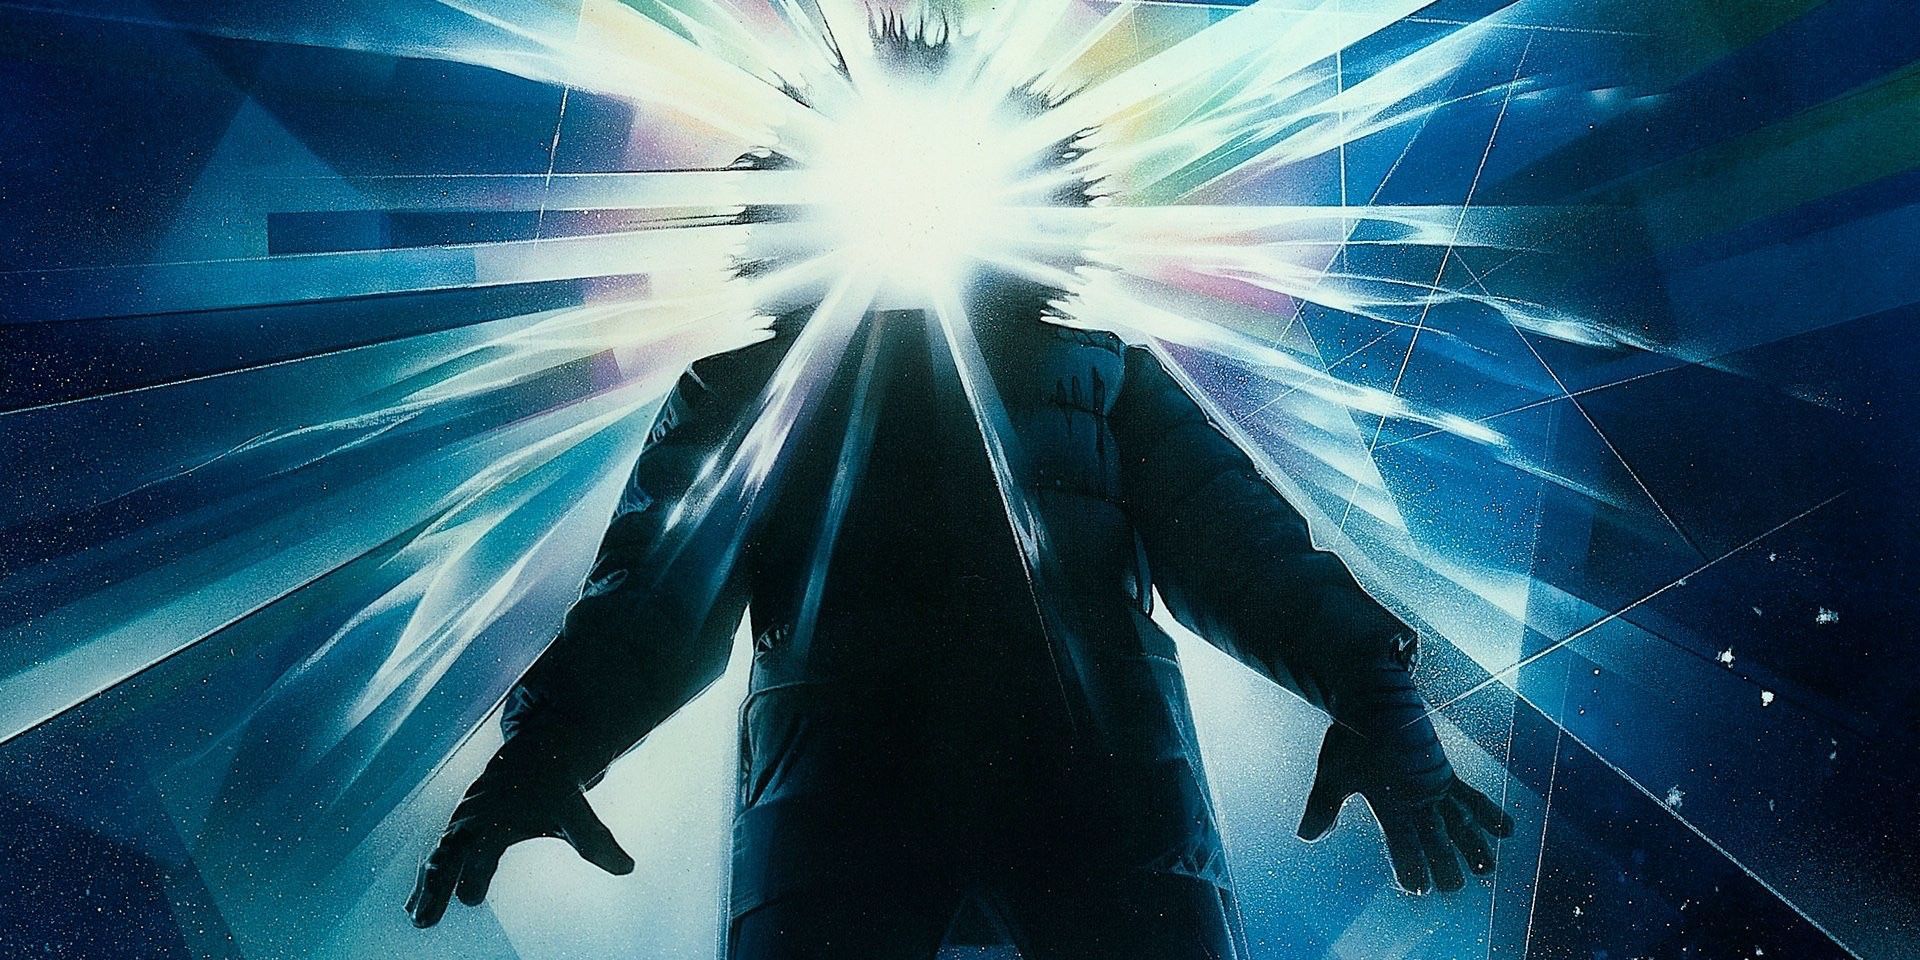 Universal Is Remaking The Thing With New Content From Original Novel